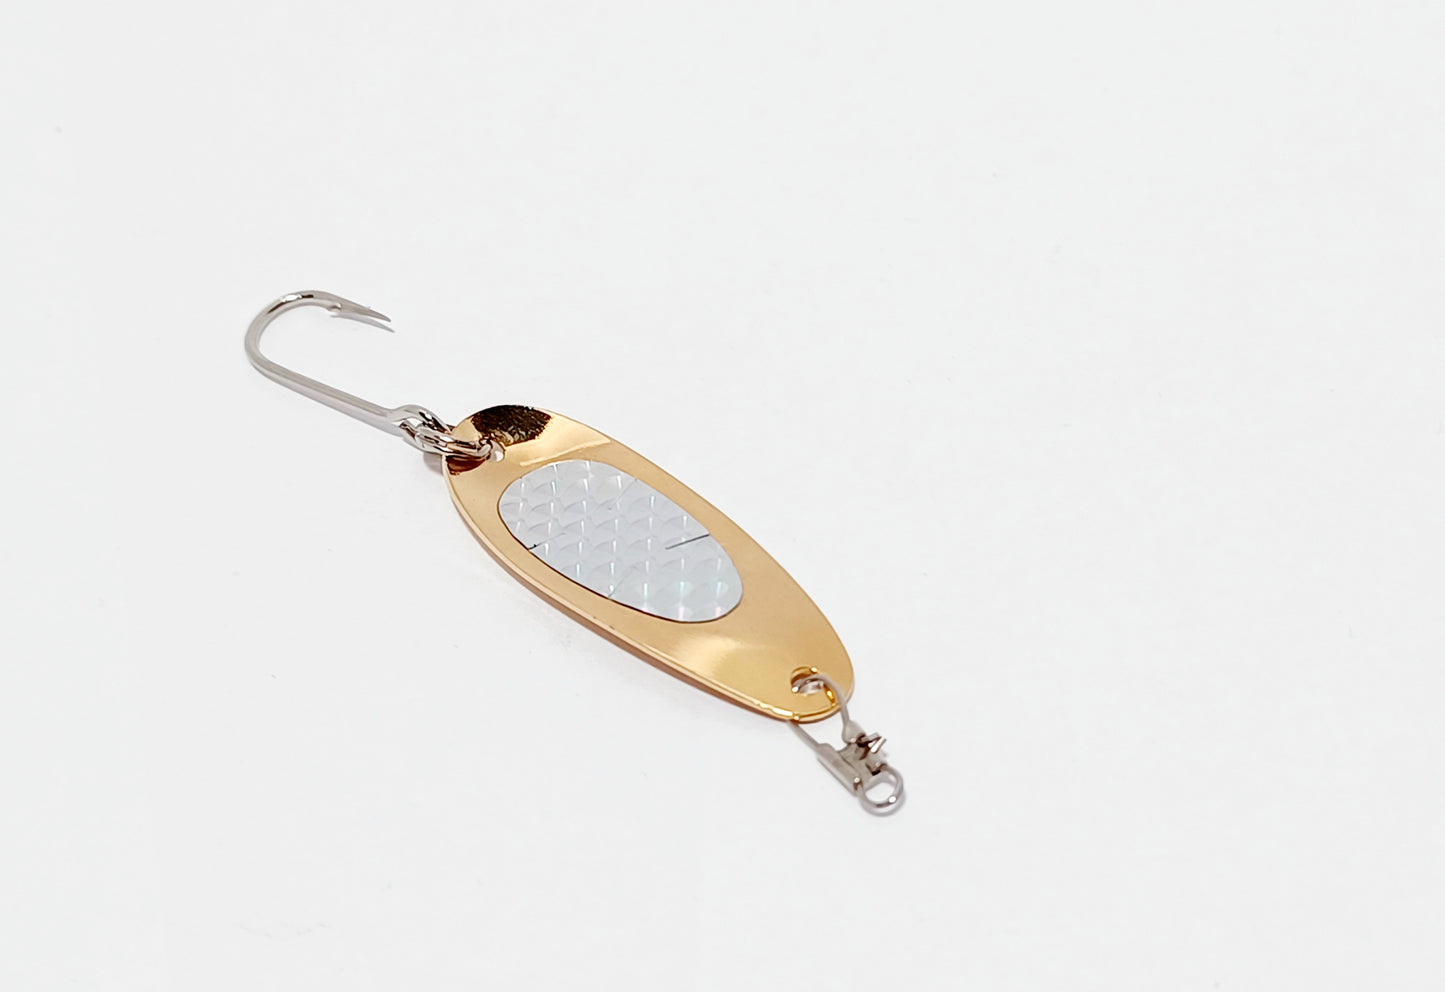 Vintage Seps gold and silver lure